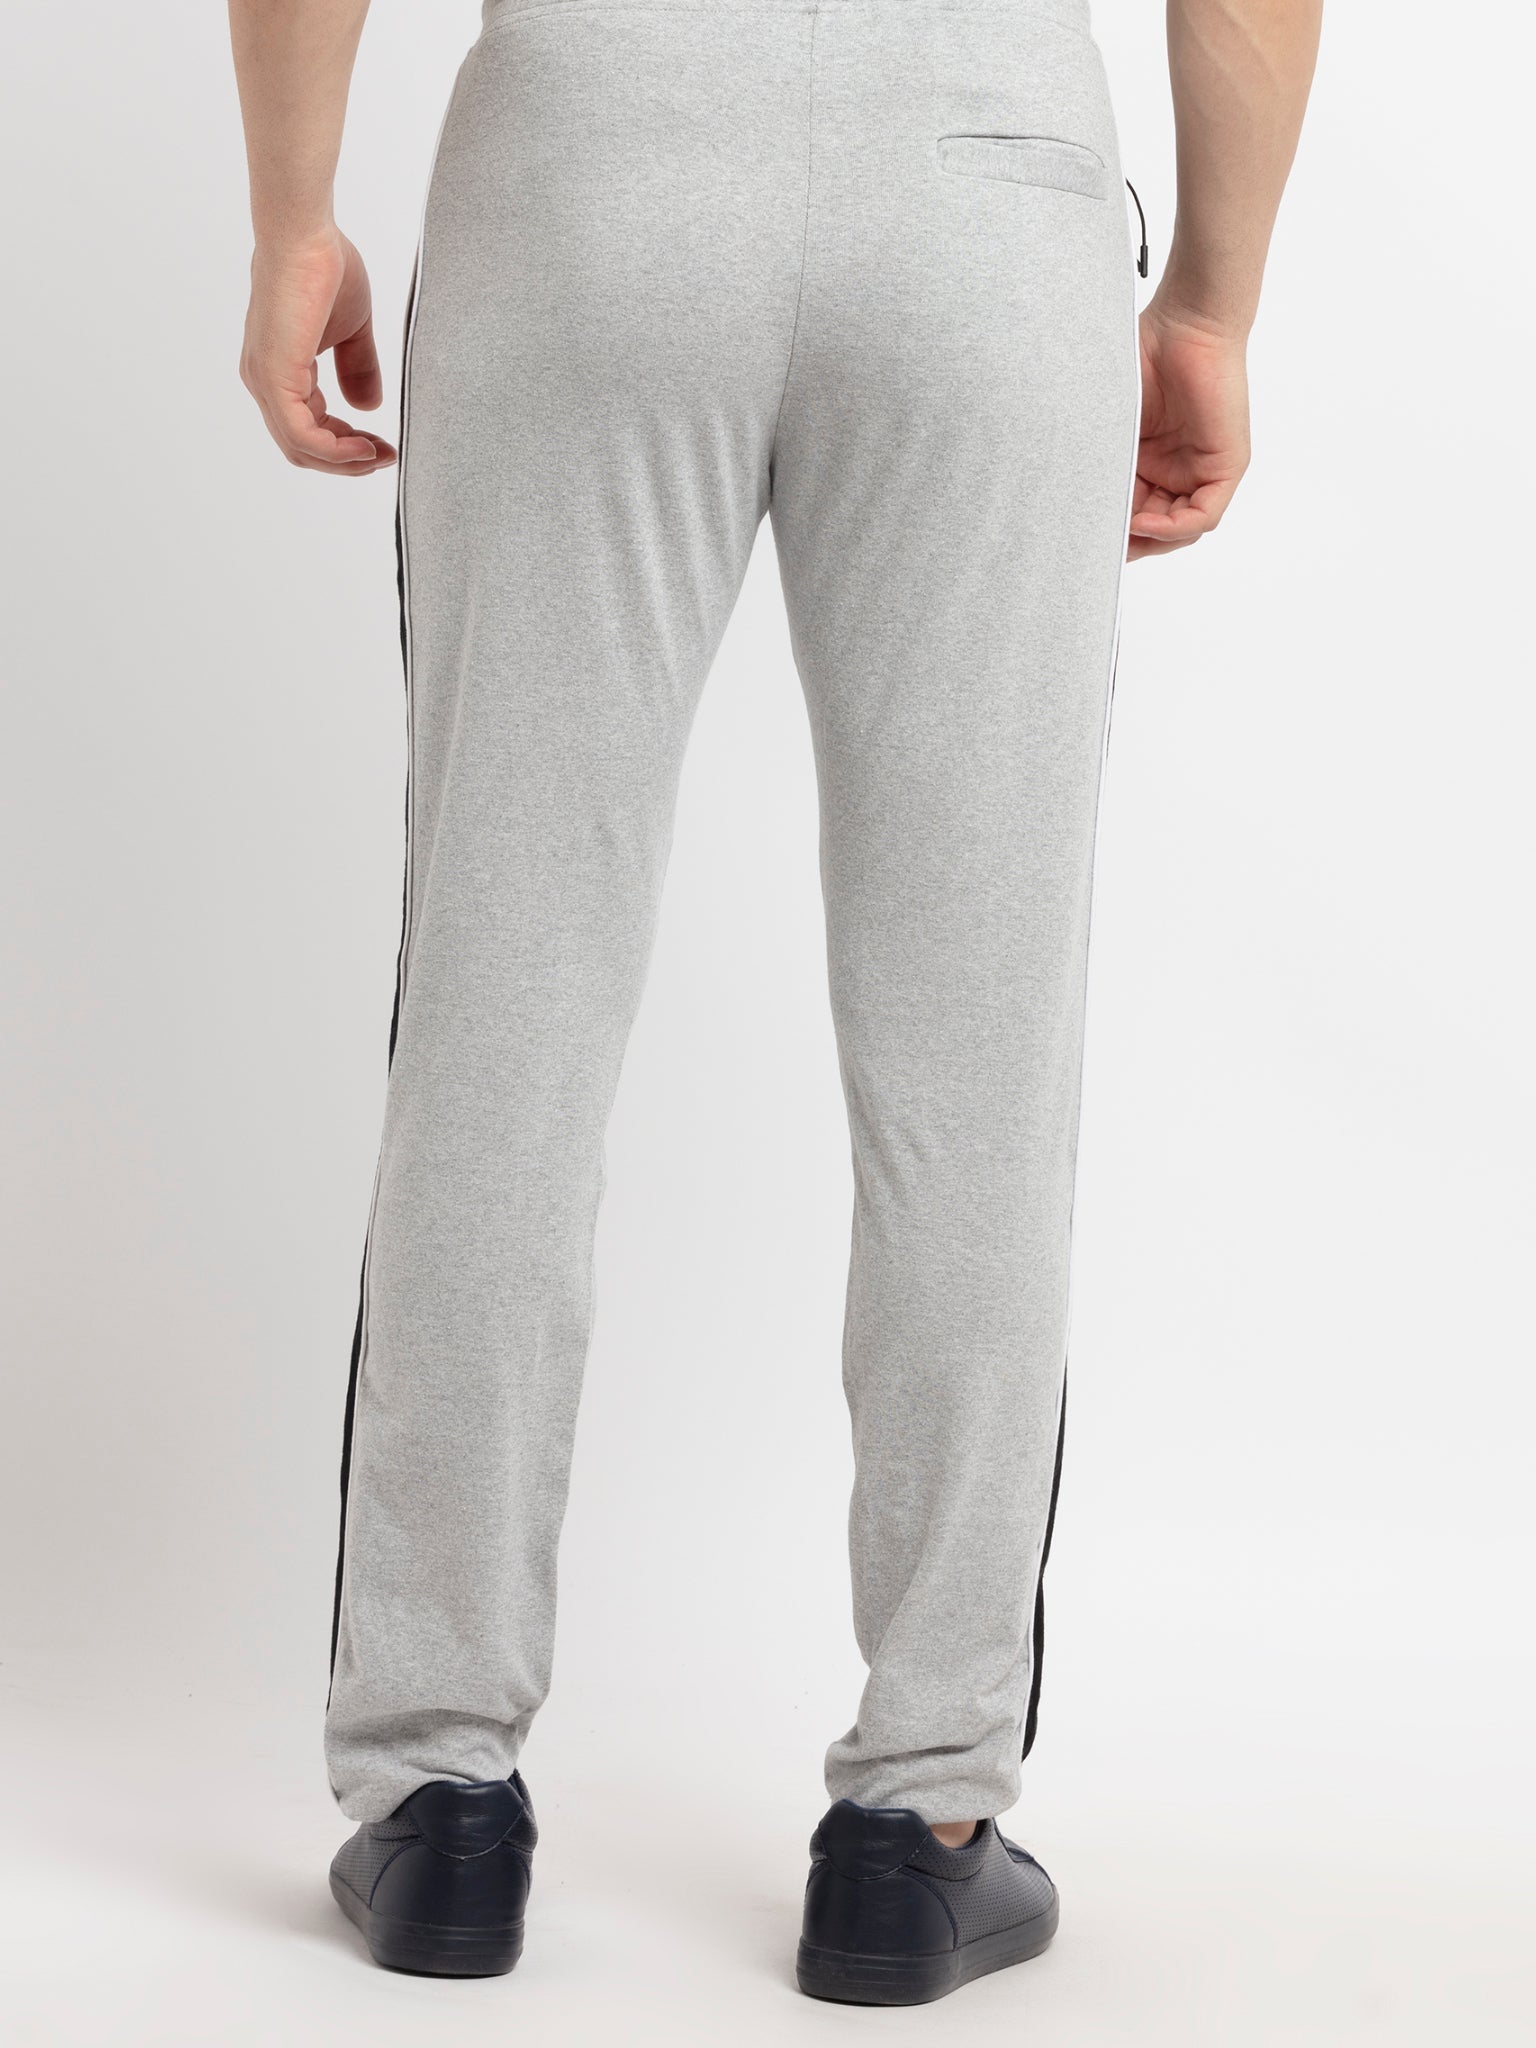 Buy adidas Trousers online  Men  332 products  FASHIOLAin